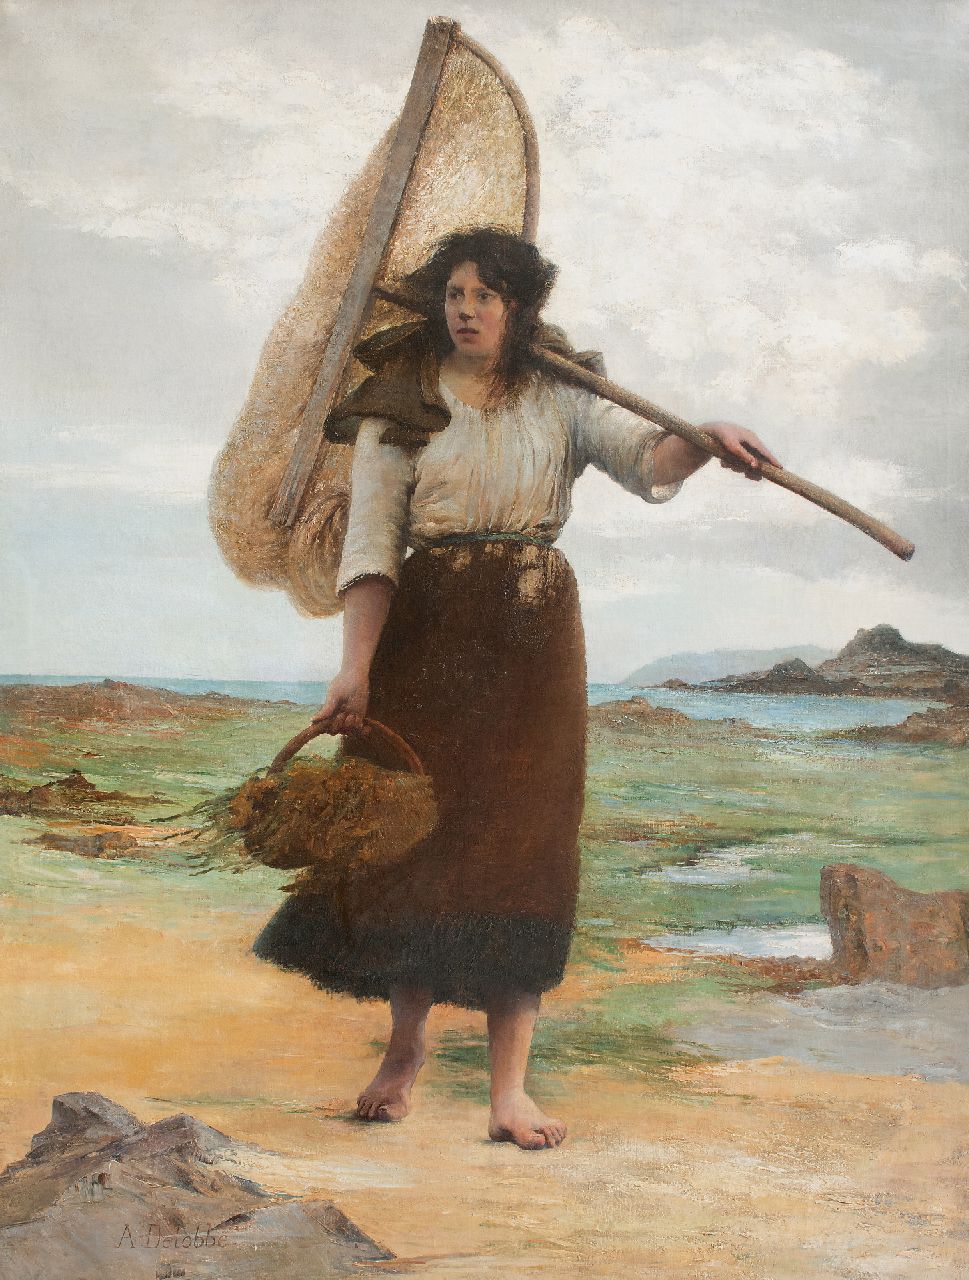 Delobbe F.A.  | François-Alfred Delobbe | Paintings offered for sale | Fisher girl, oil on canvas 248.0 x 191.0 cm, signed l.r.